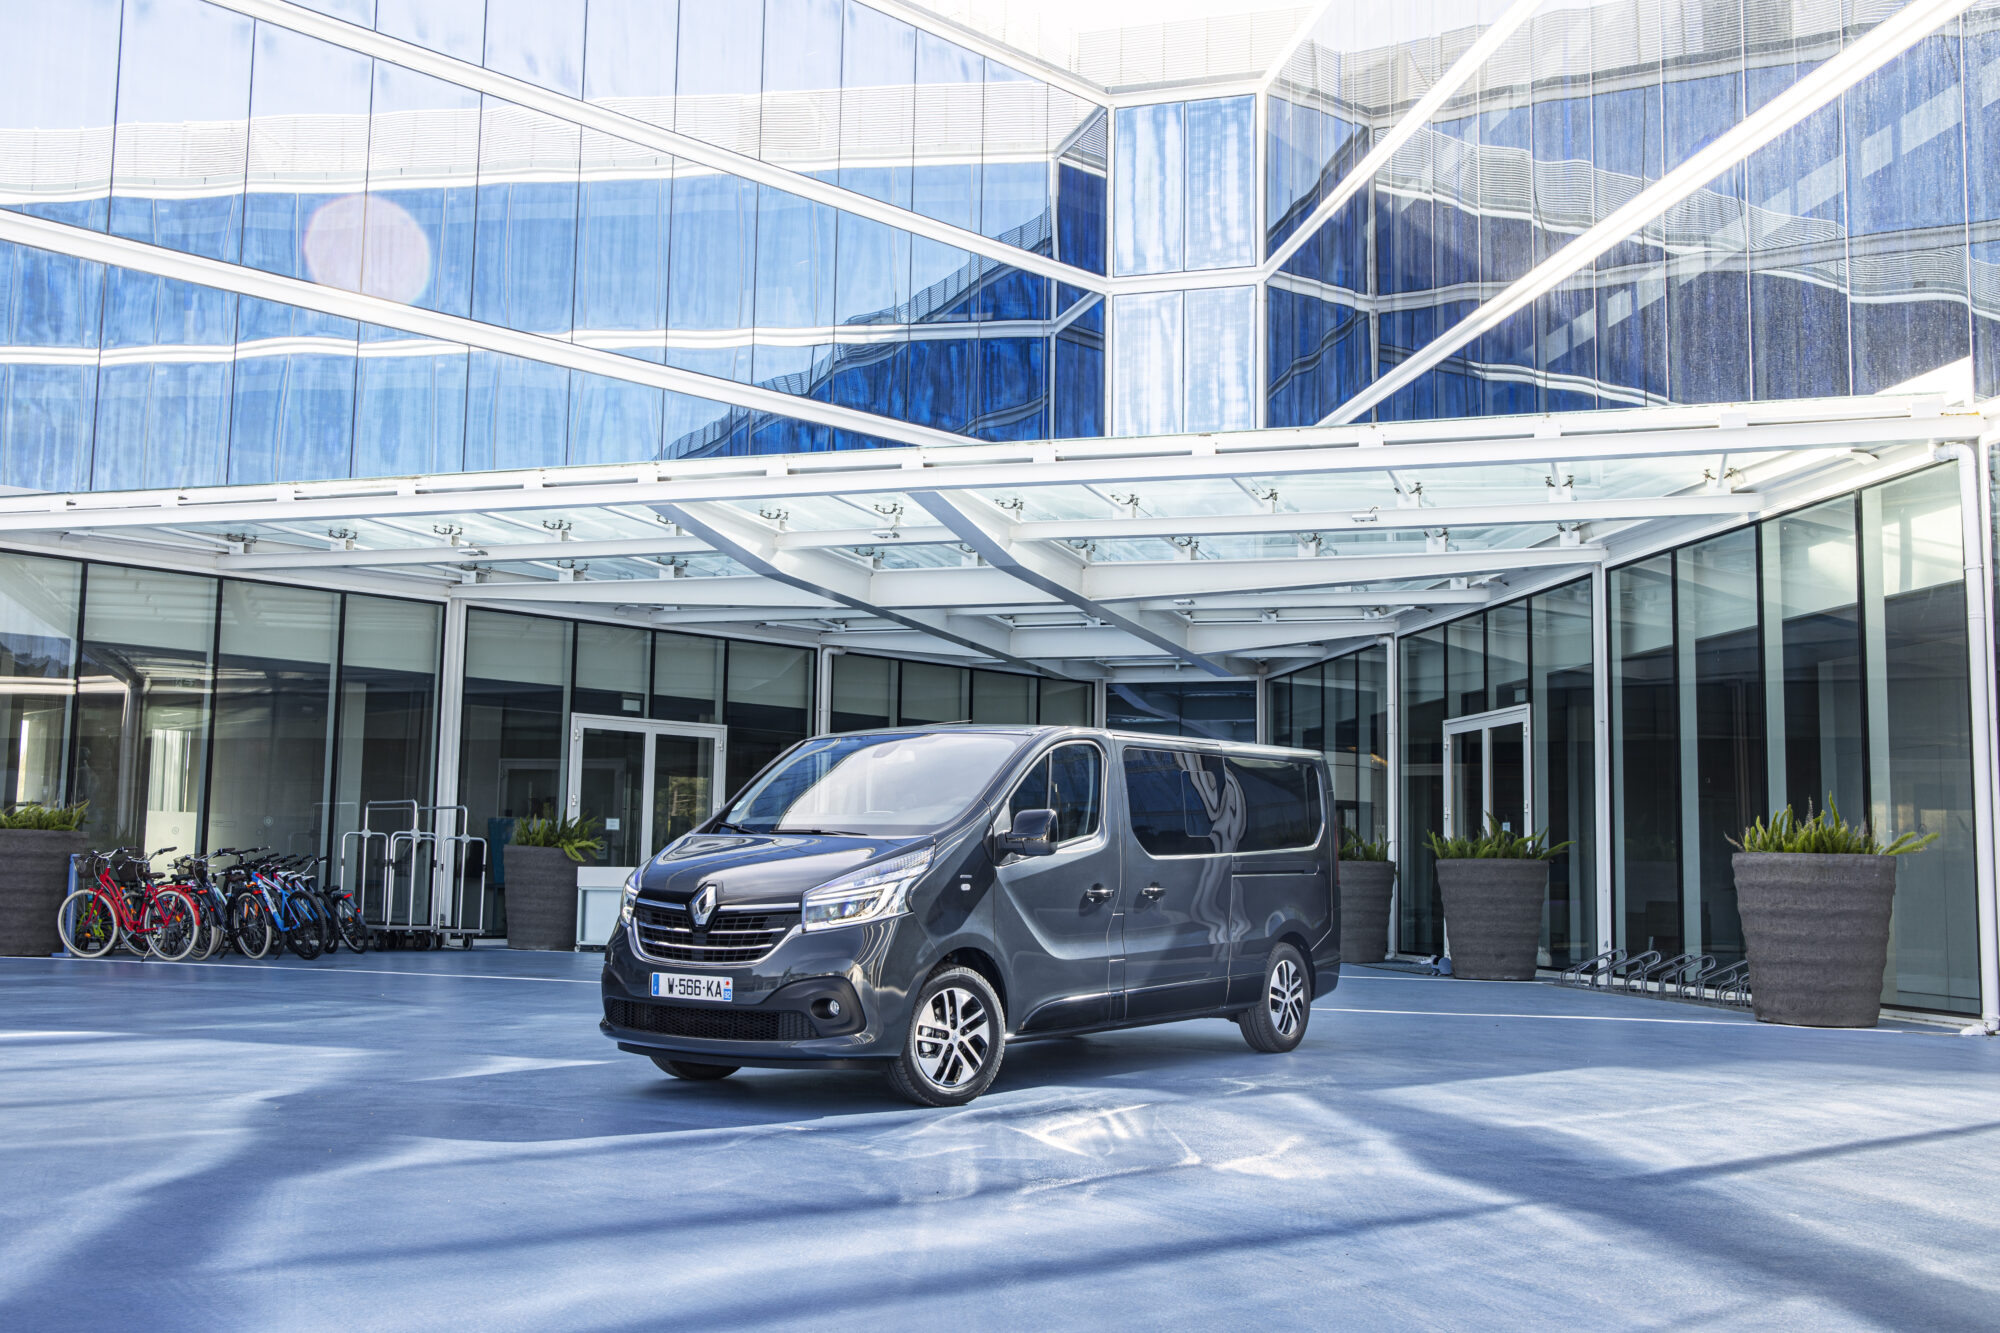 2019 - New Renault TRAFIC SpaceClass press tests in Portugal